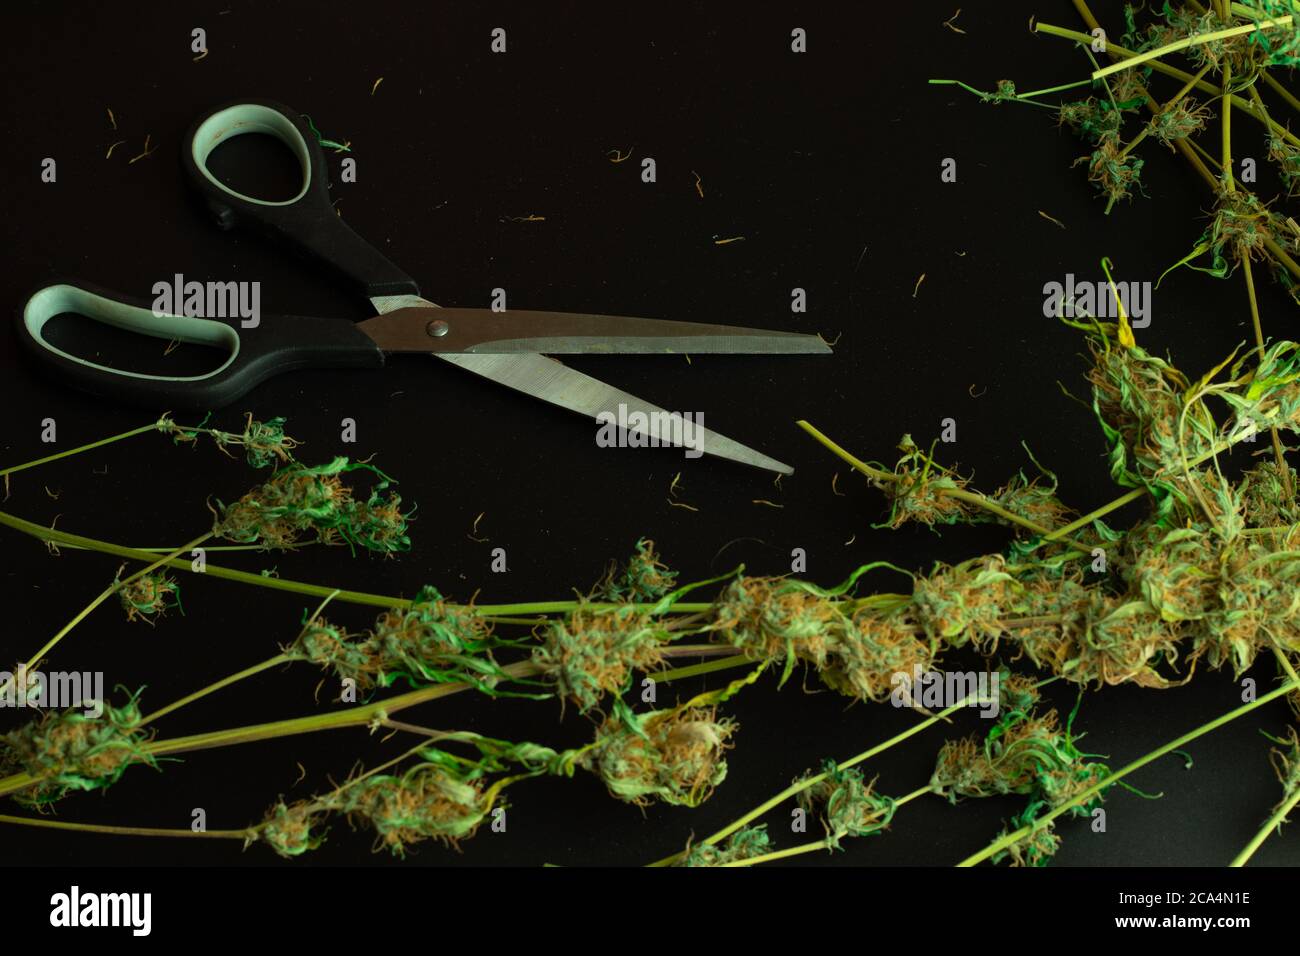 Scissors on black background with cannabis buds and plants. Top view and copy space. Medical marijuana business illustration Stock Photo